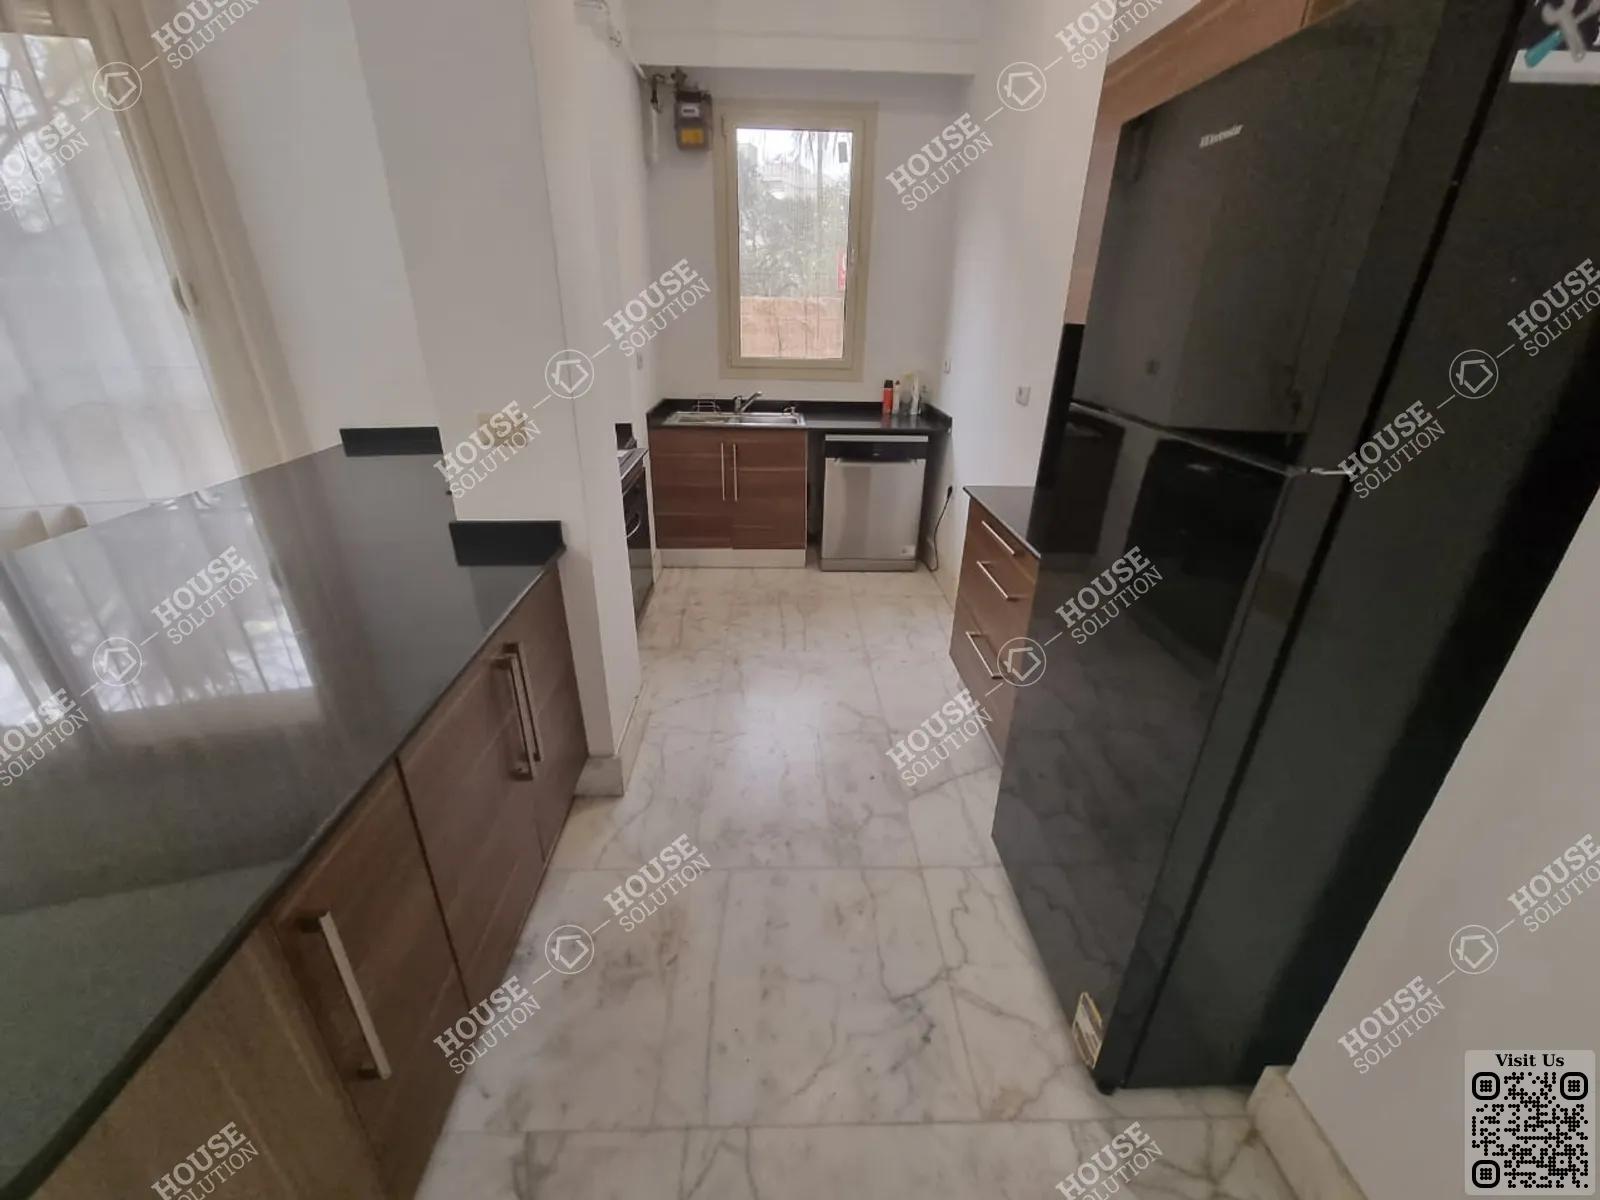 KITCHEN  @ Apartments For Rent In Maadi Maadi Sarayat Area: 184 m² consists of 2 Bedrooms 3 Bathrooms Modern furnished 5 stars #5268-2